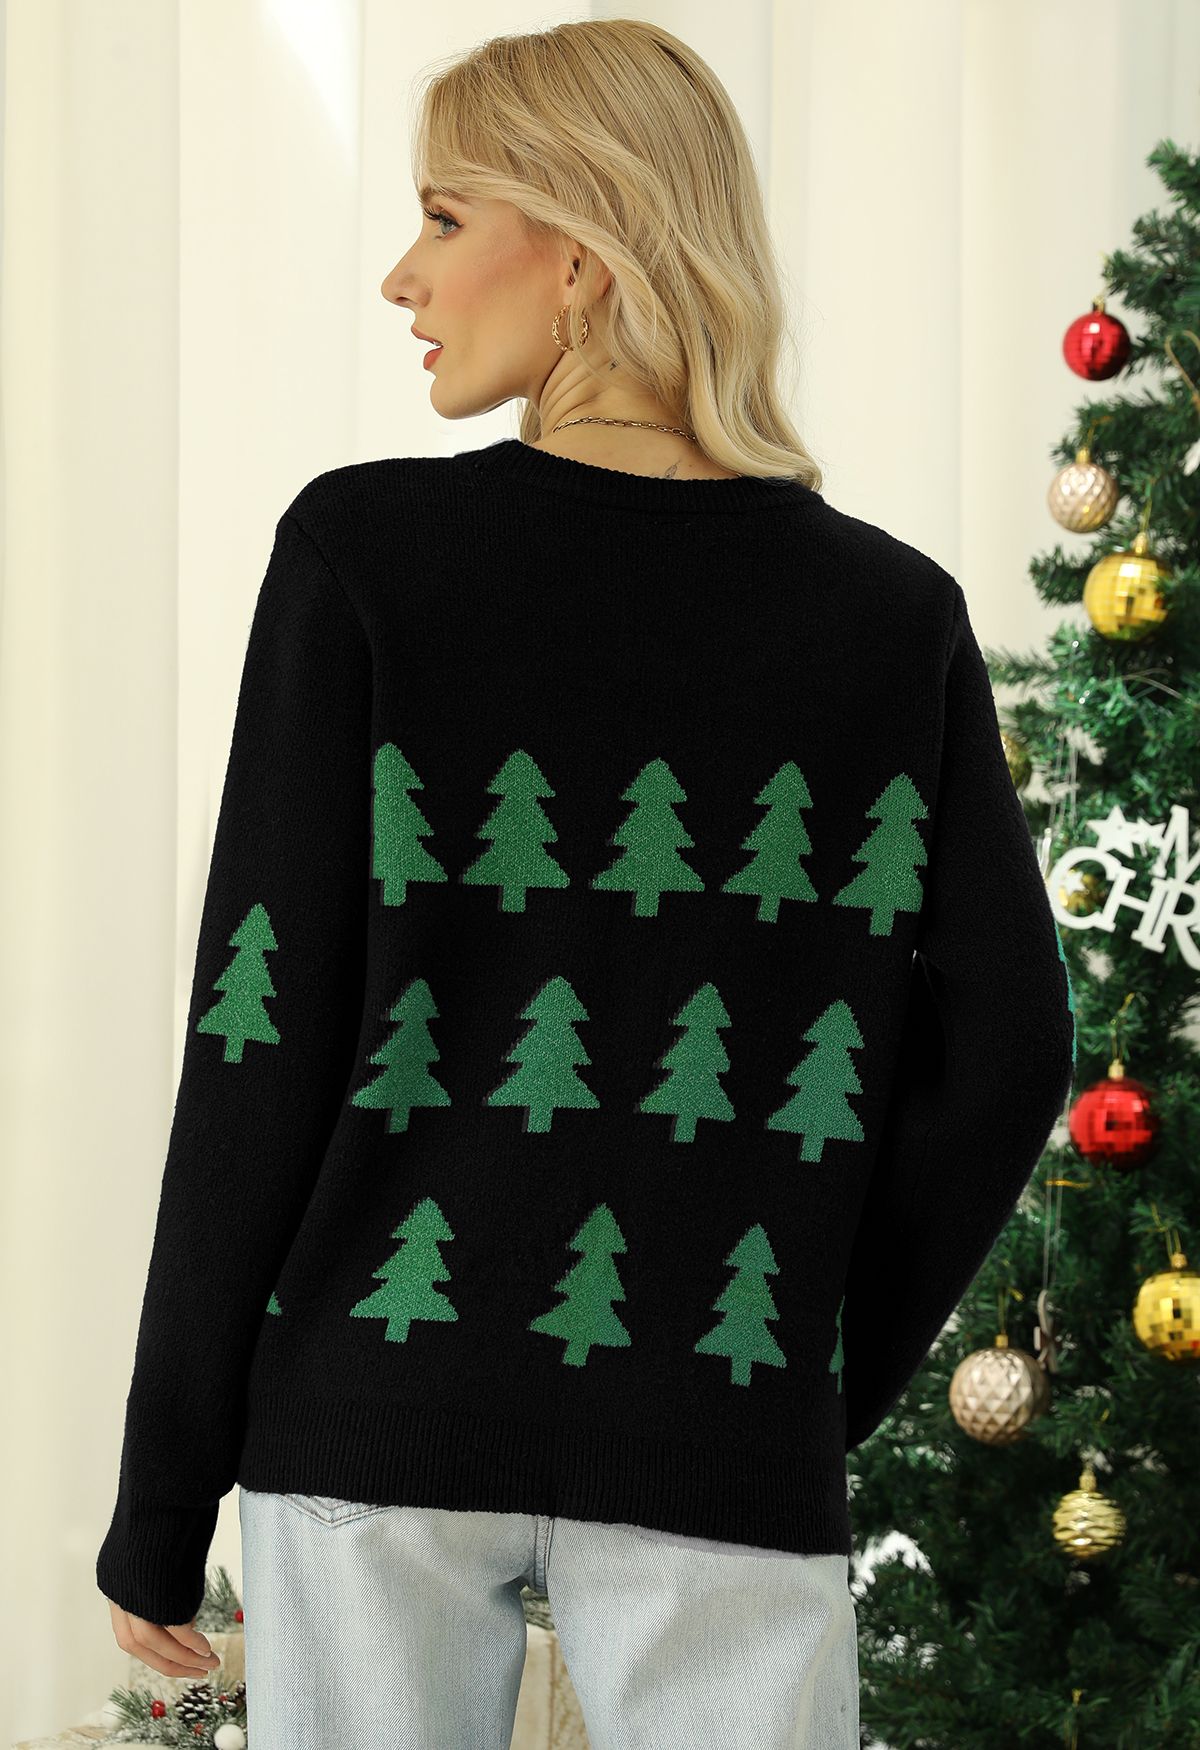 Sequined Christmas Tree Knit Sweater in Black